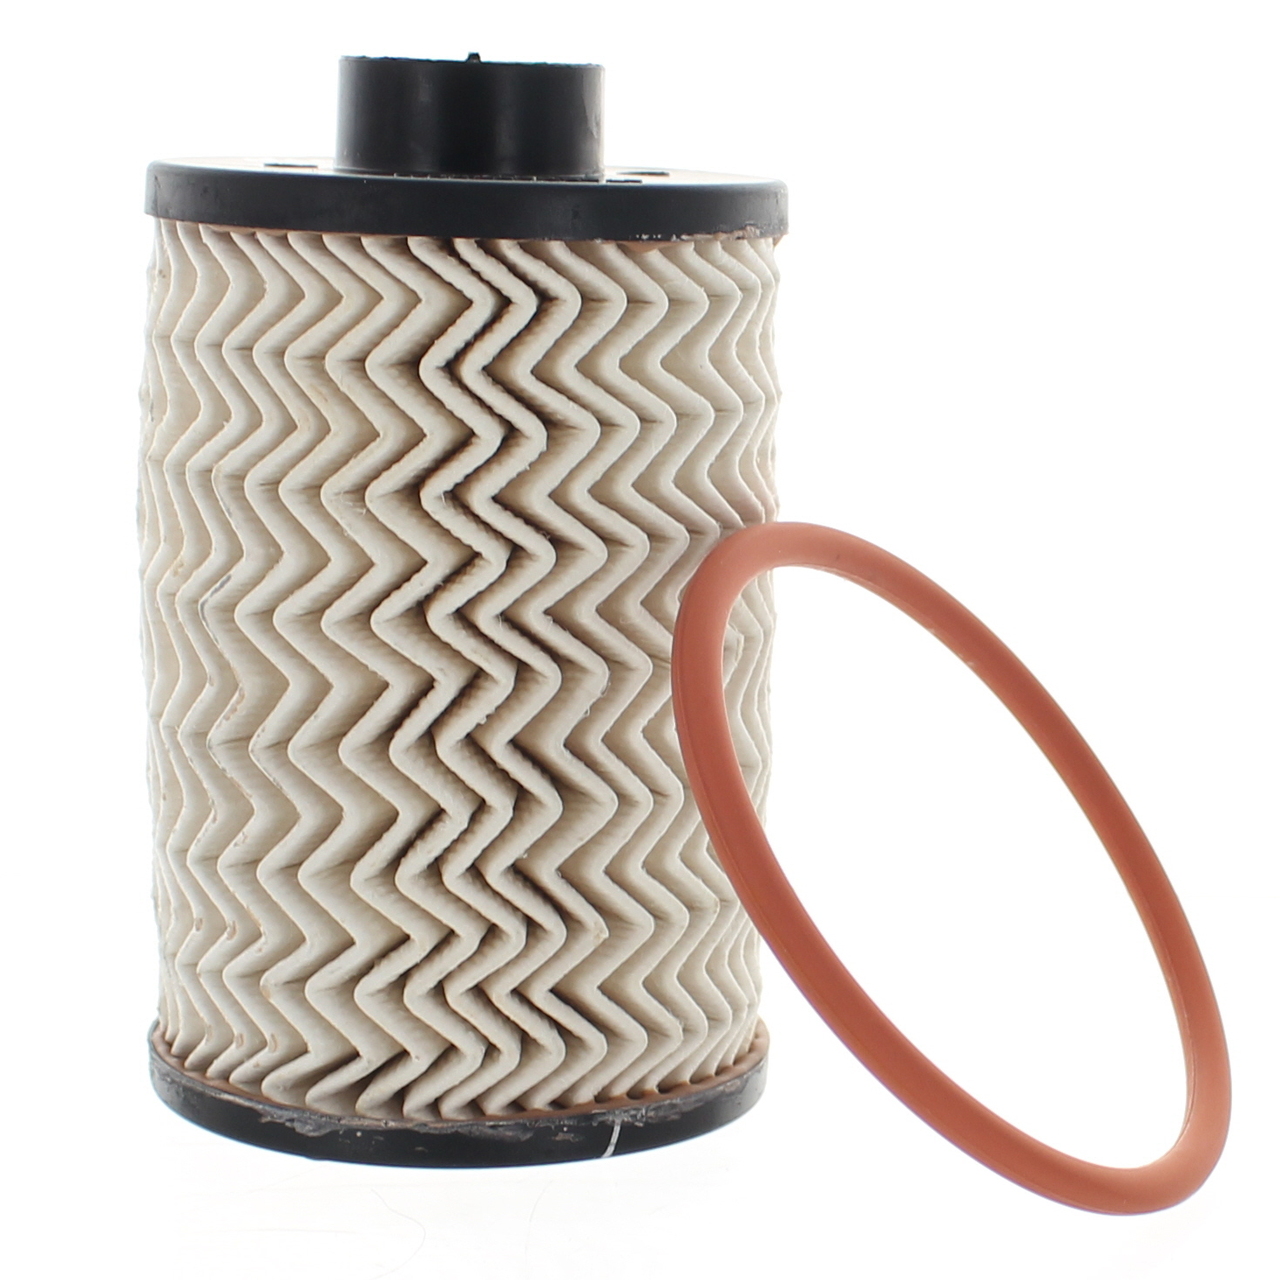 Product image for Fuel Filter